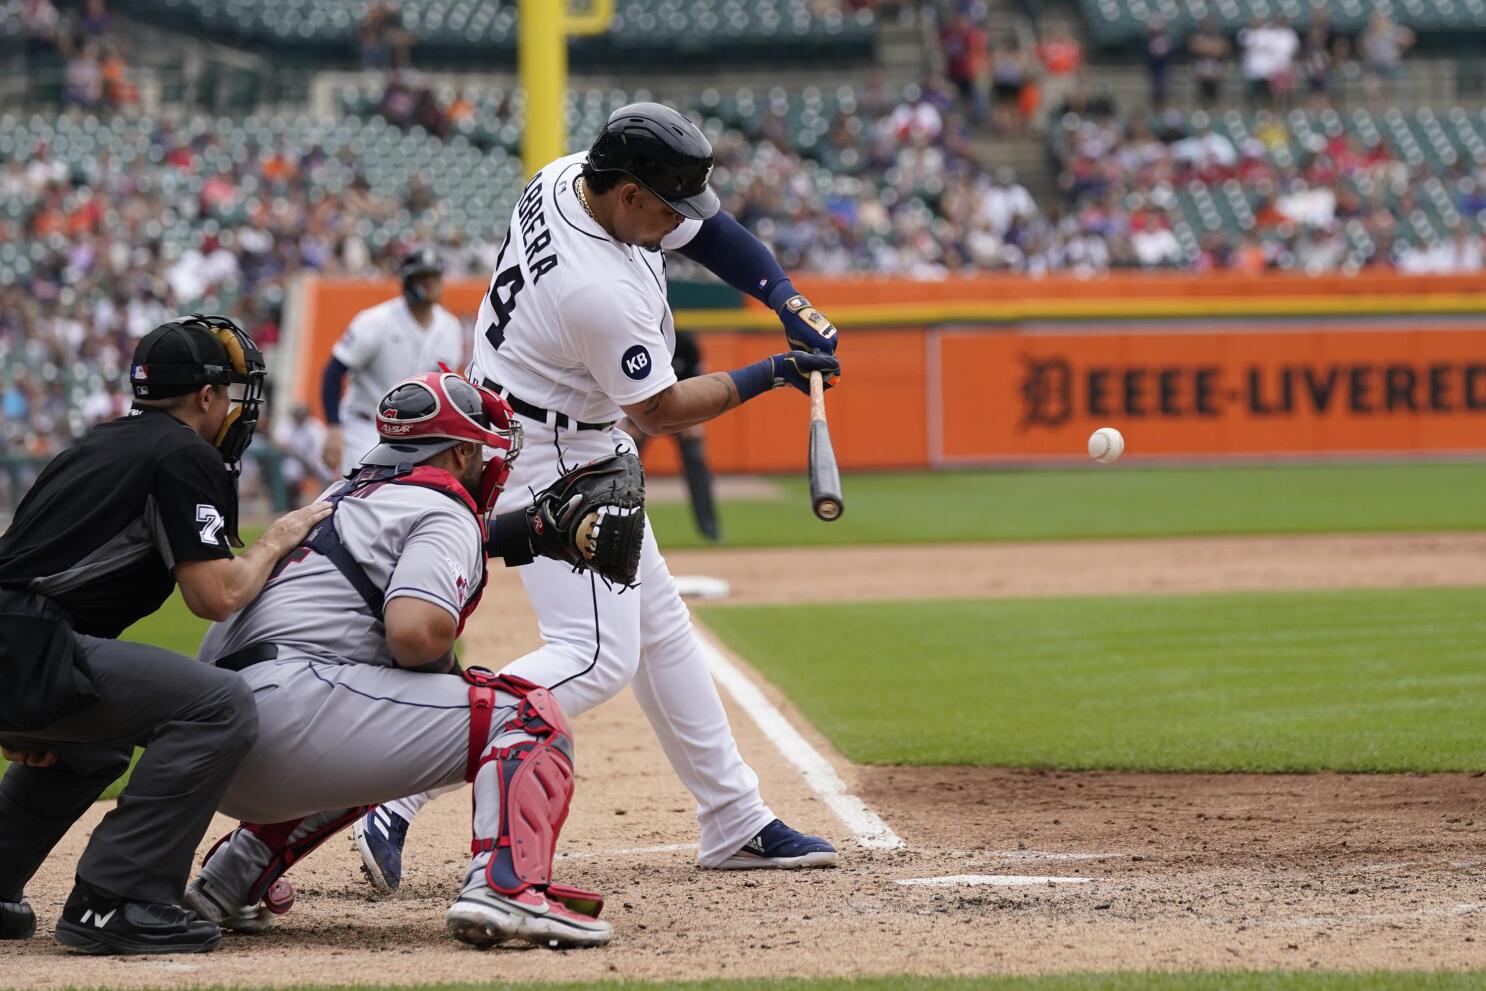 Report: Miguel Cabrera Will Attend 12th MLB All-Star Game 